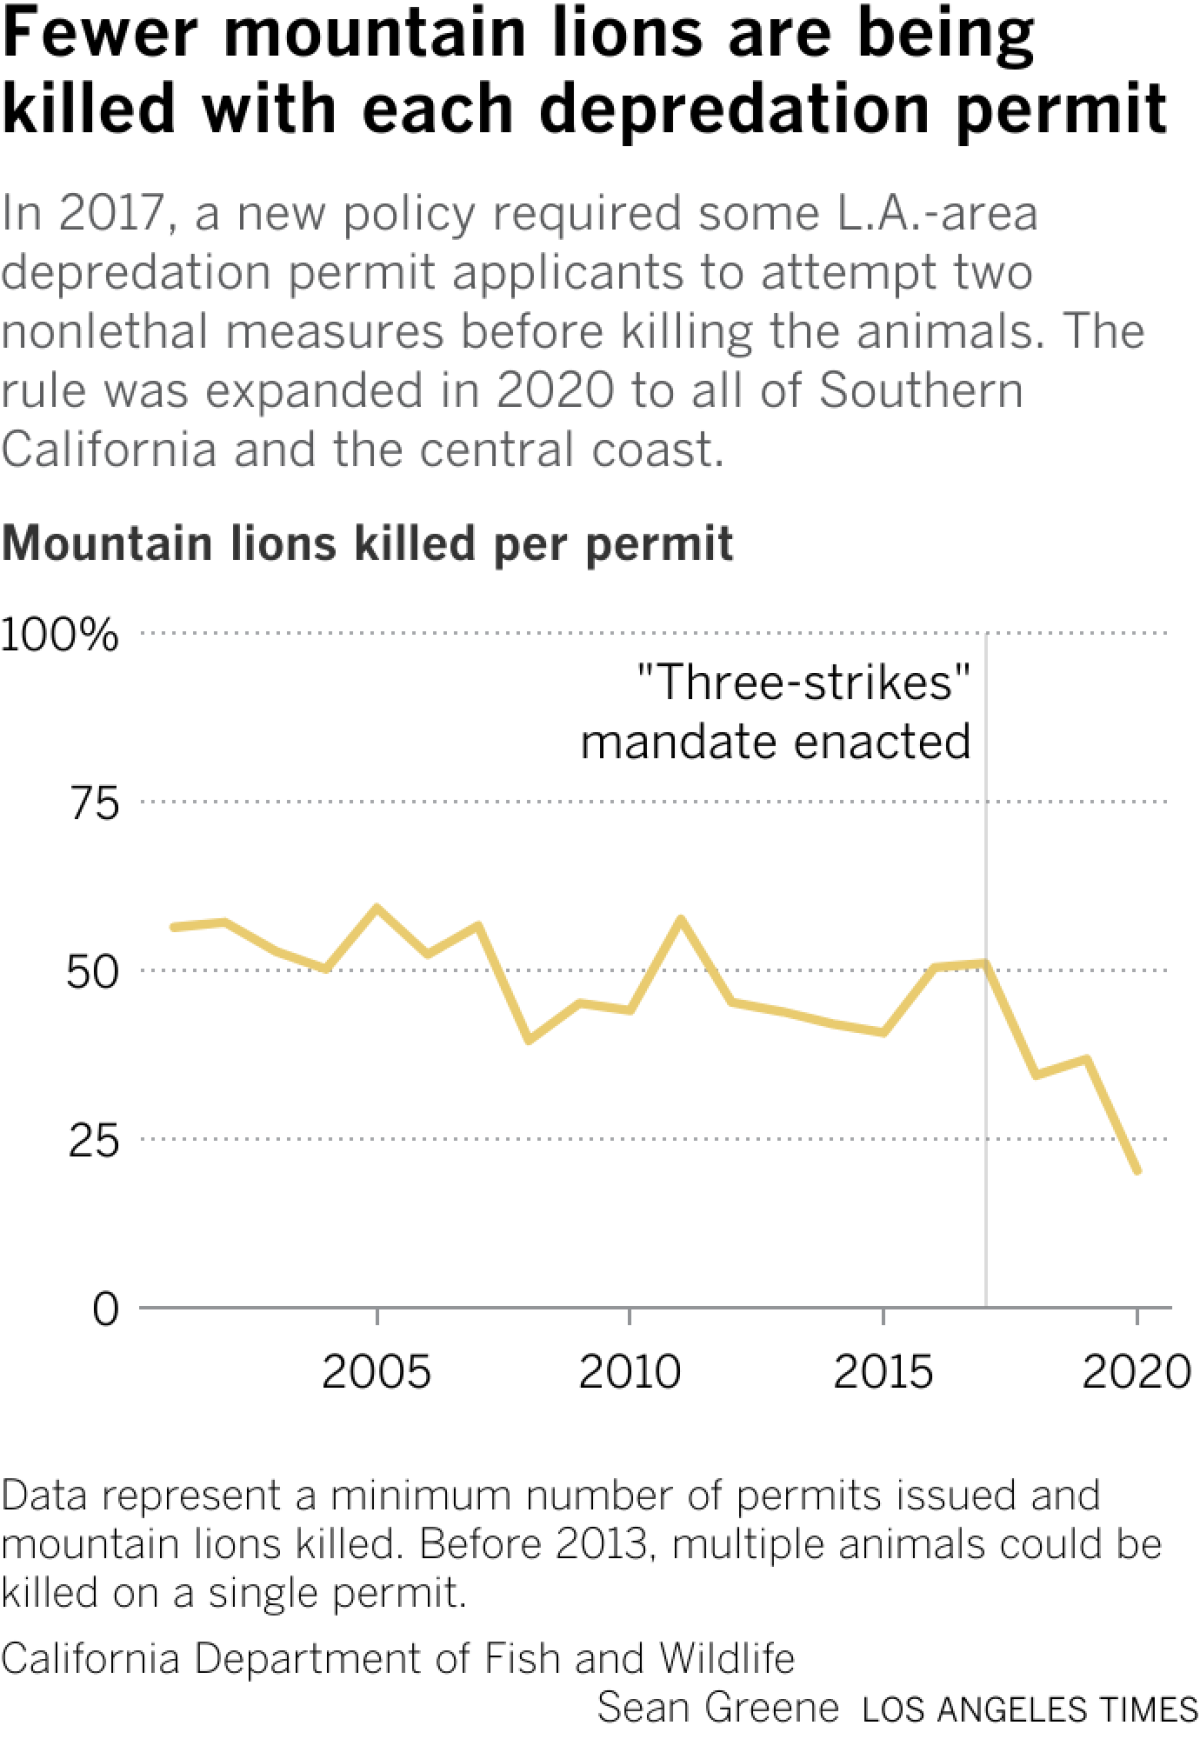 The percentage of mountain lions killed per depredation permit has declined in the last 20 years.